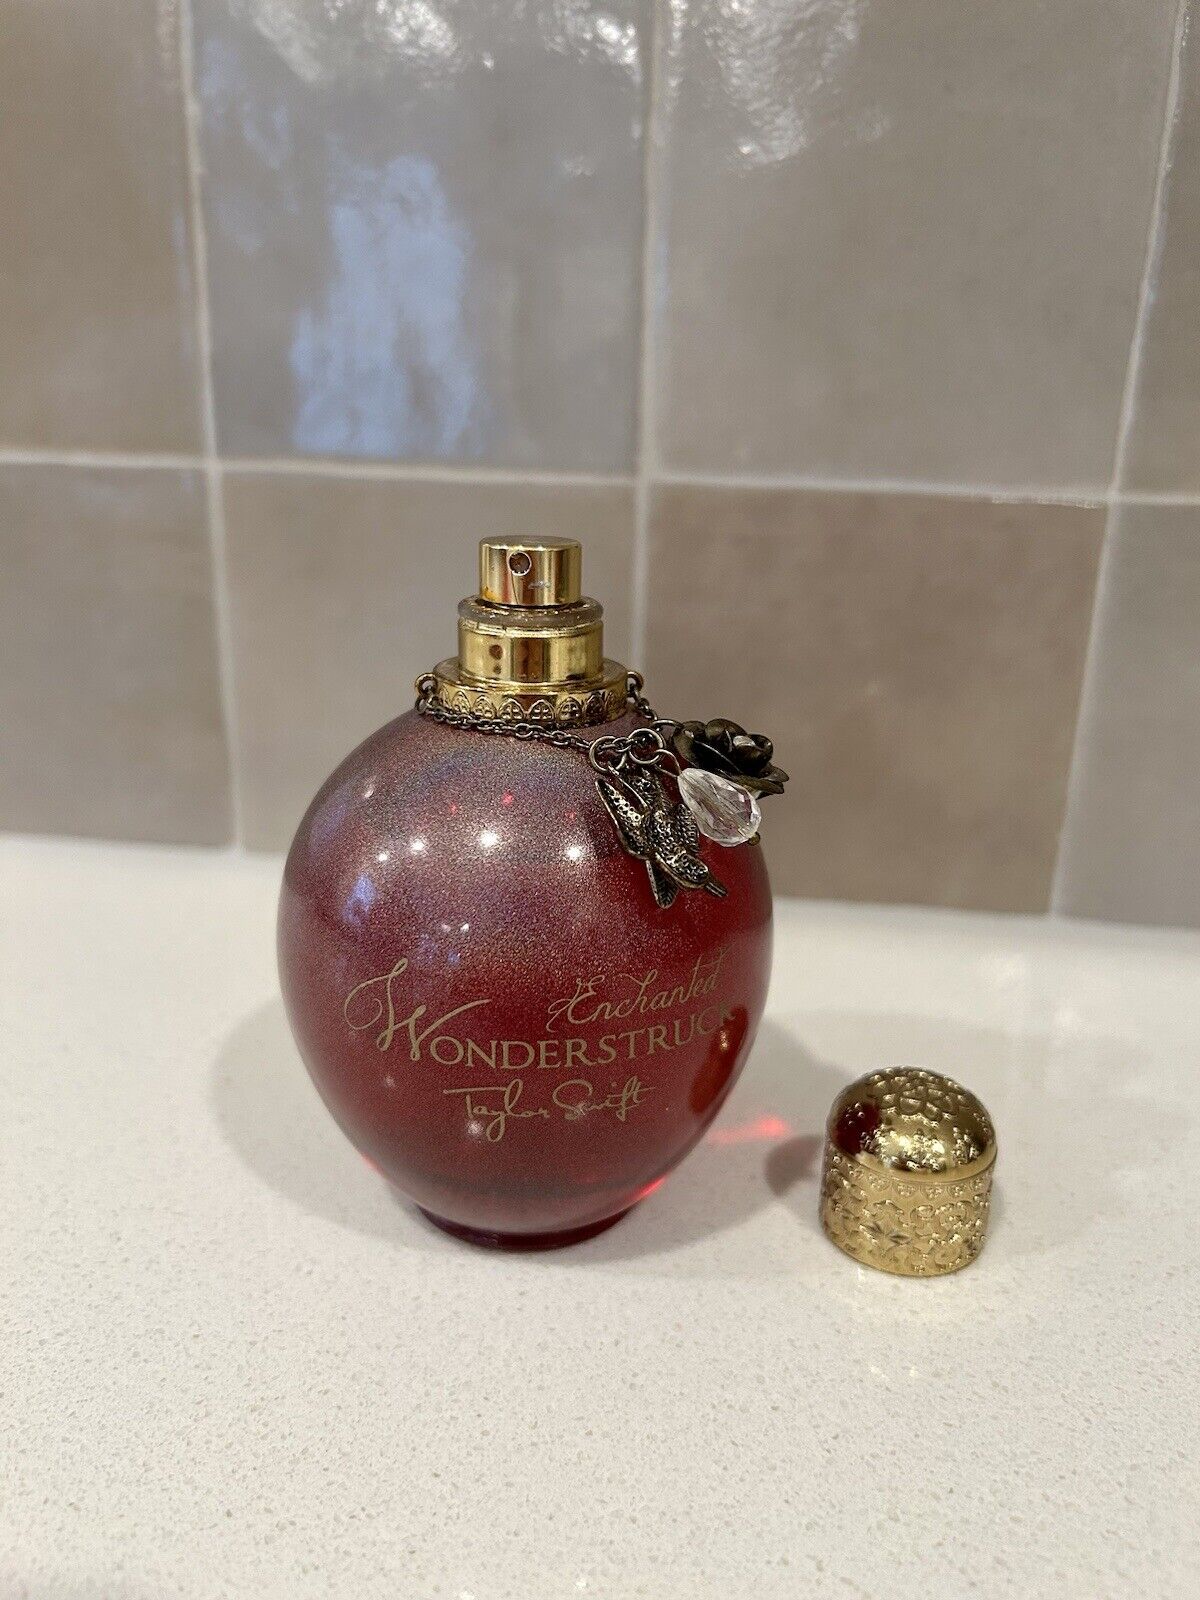 Enchanted Wonderstruck by Taylor Swift Spray Perfume 3.4oz with Charms 90% Full